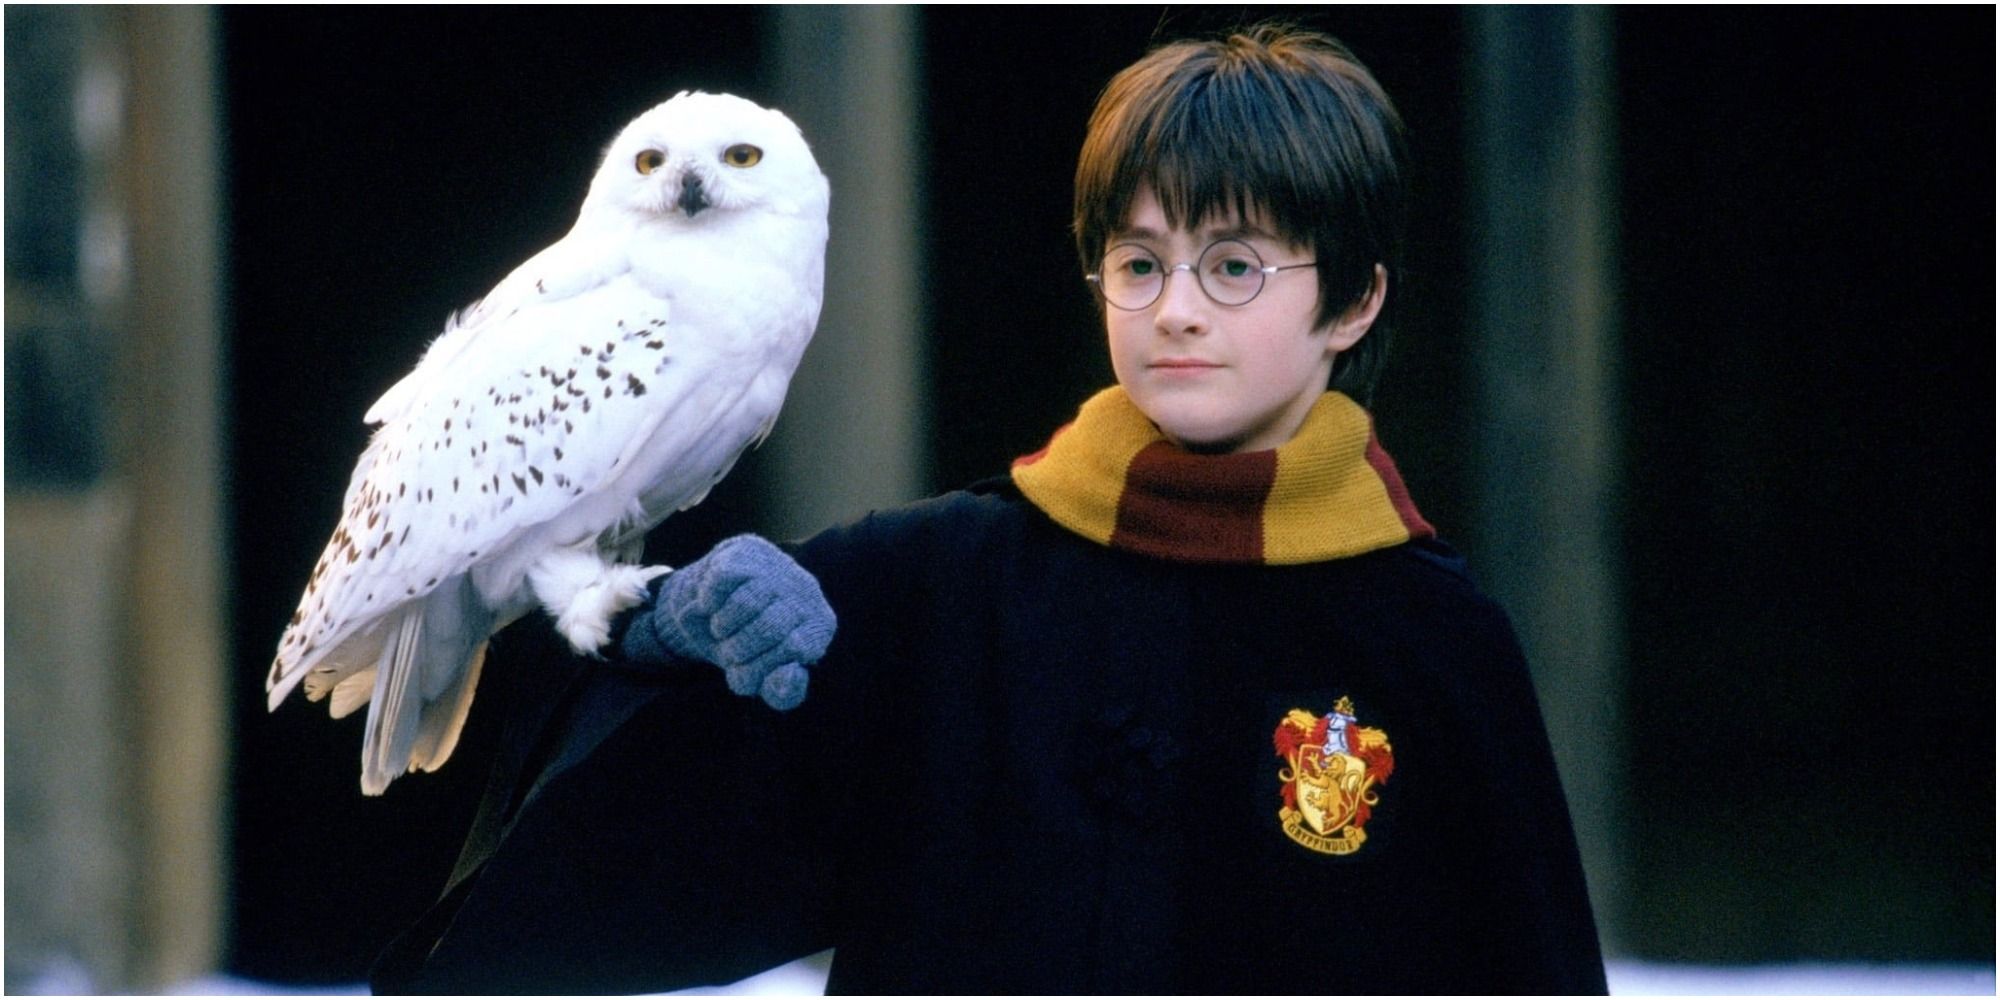 Harry Potter with a bird on his hand in Harry Potter And The Philosopher's Stone